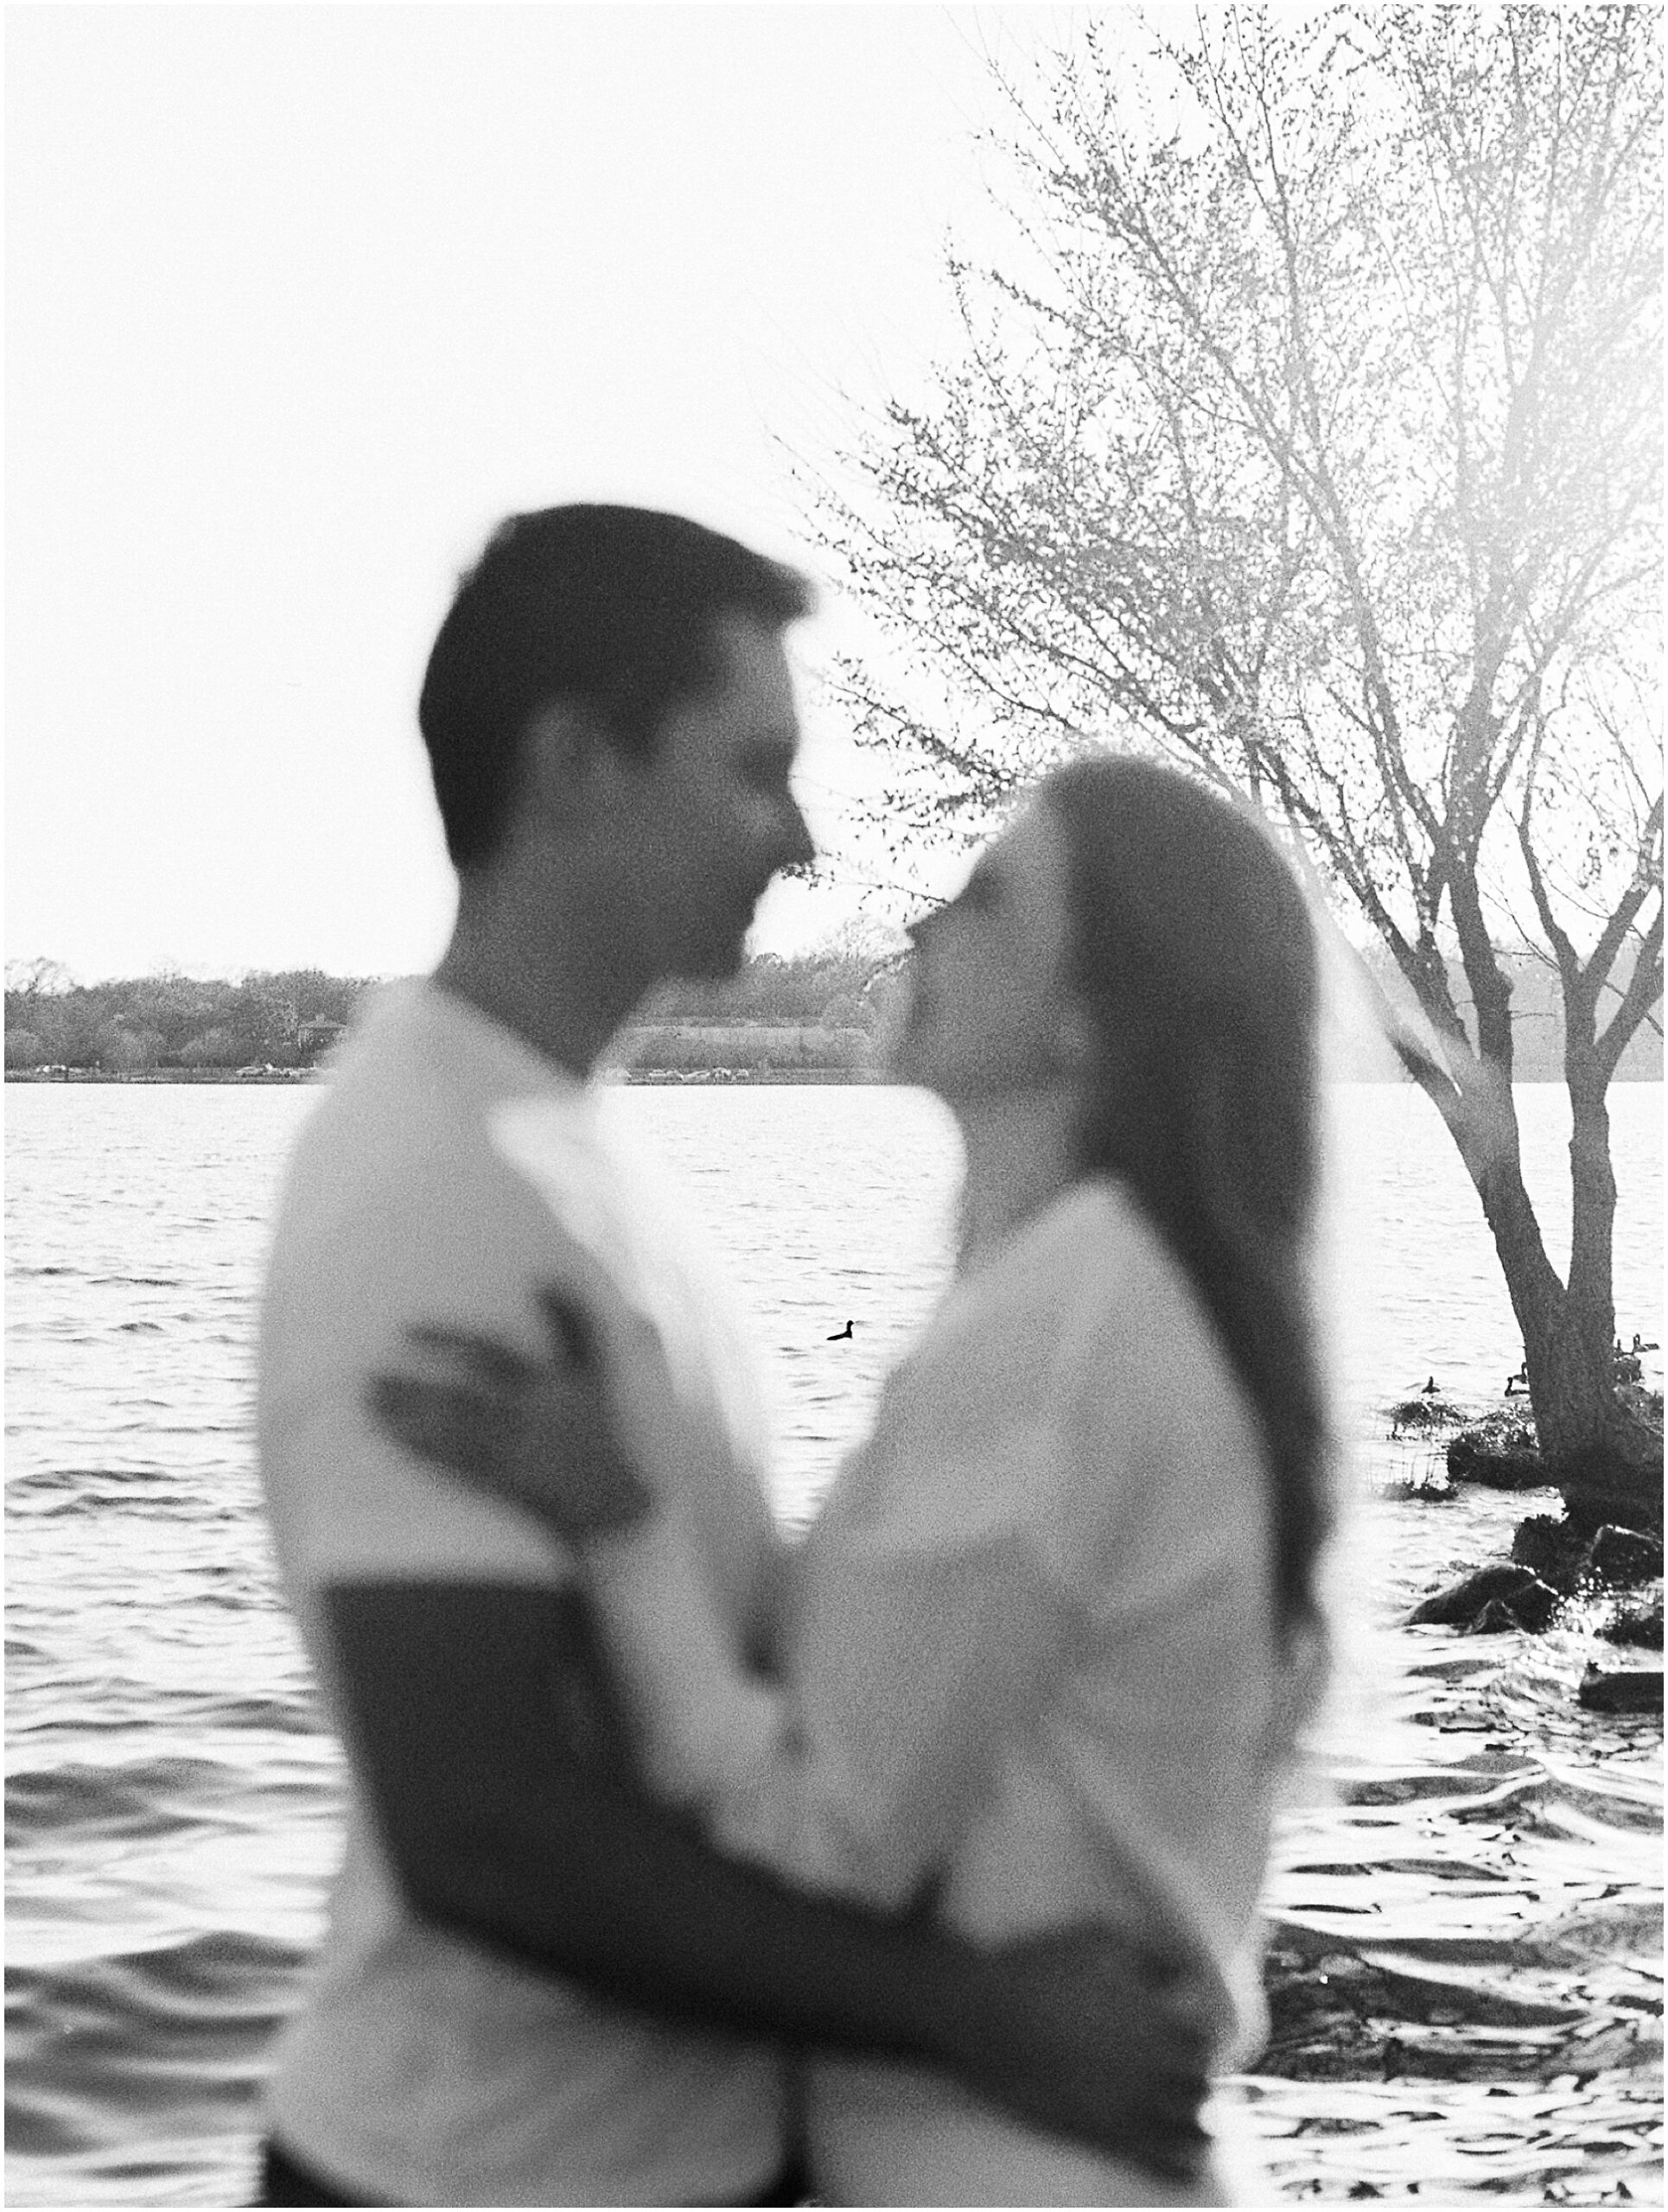 Erin and Zach embracing on a rustic wooden dock at White Rock Lake during their engagement session